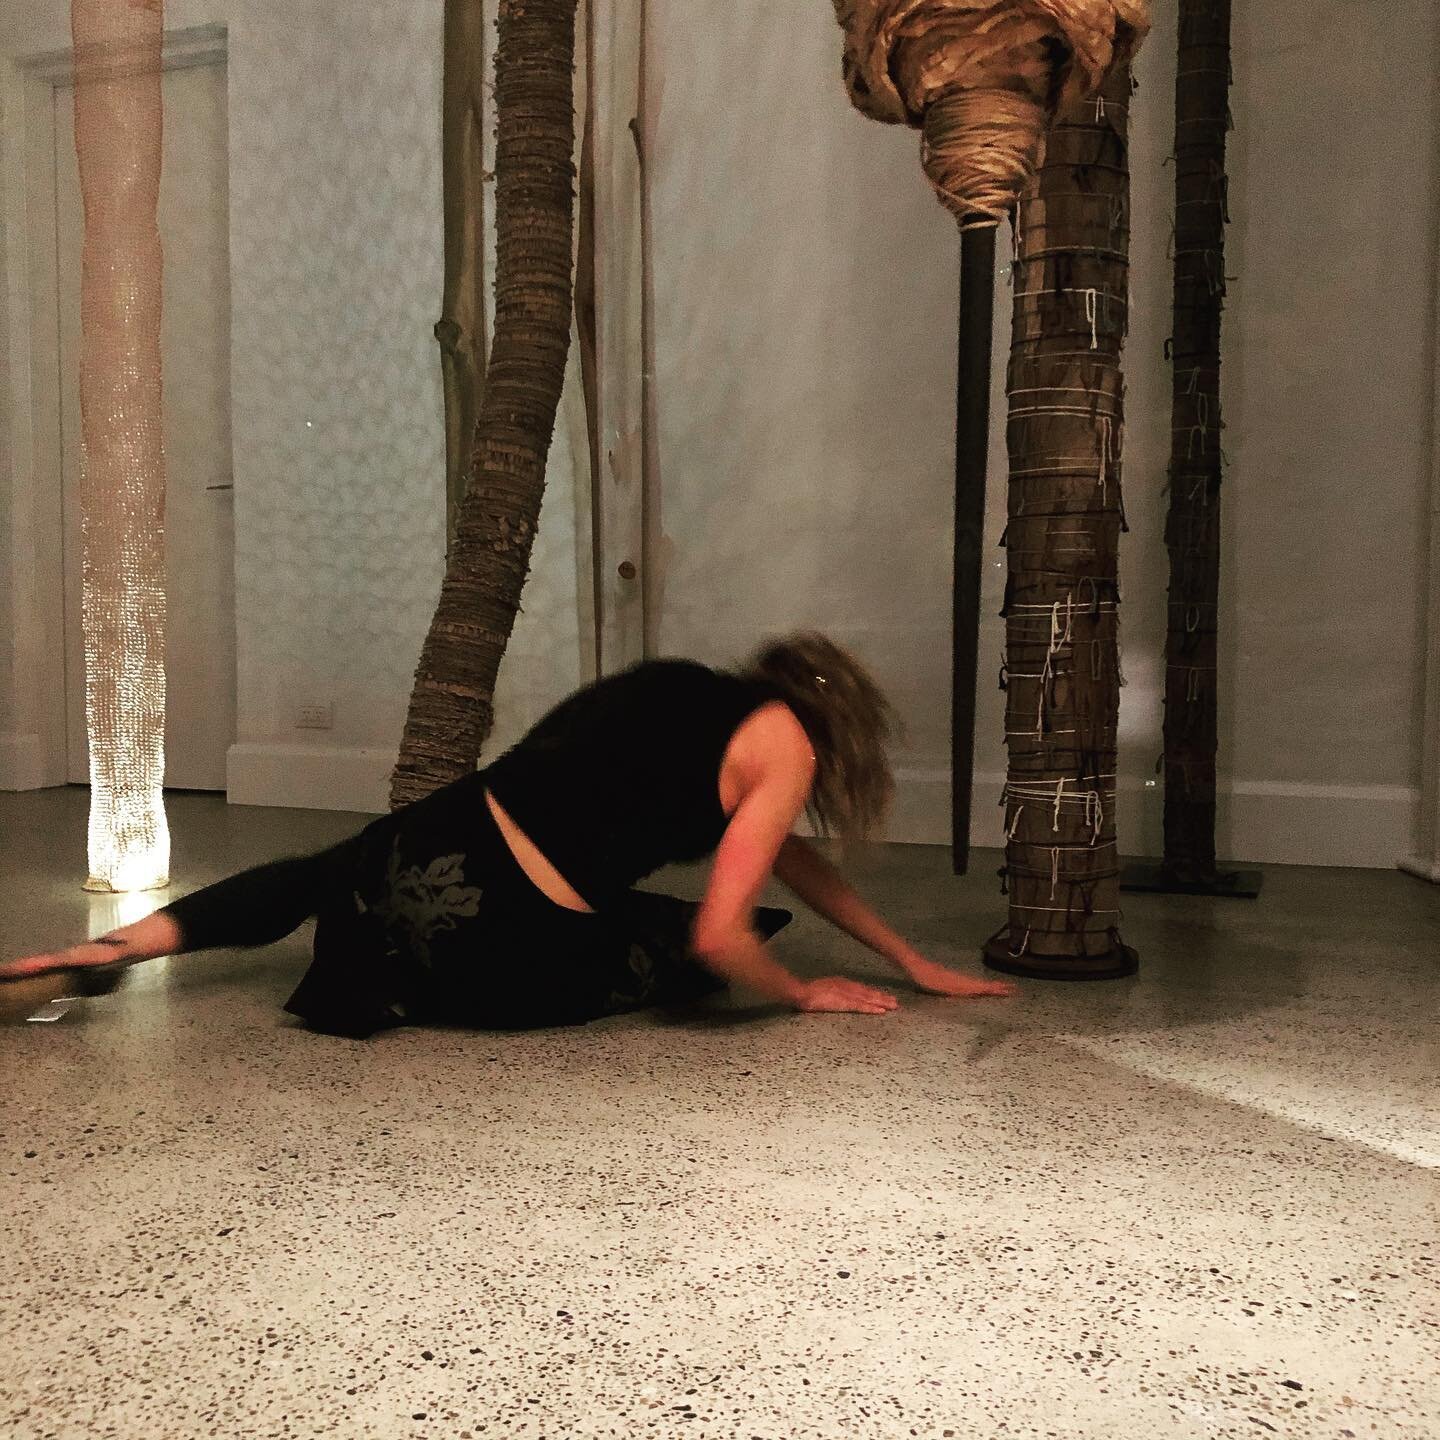 It&rsquo;s a wrap! 💥
A huge BRAVO  to Katya Petetskaya for her moving self devised performance as guest artist in FOURTH WALL / scenes from the forest, on closing weekend of the exhibition.  I felt delighted and honoured when Katya agreed  to interp